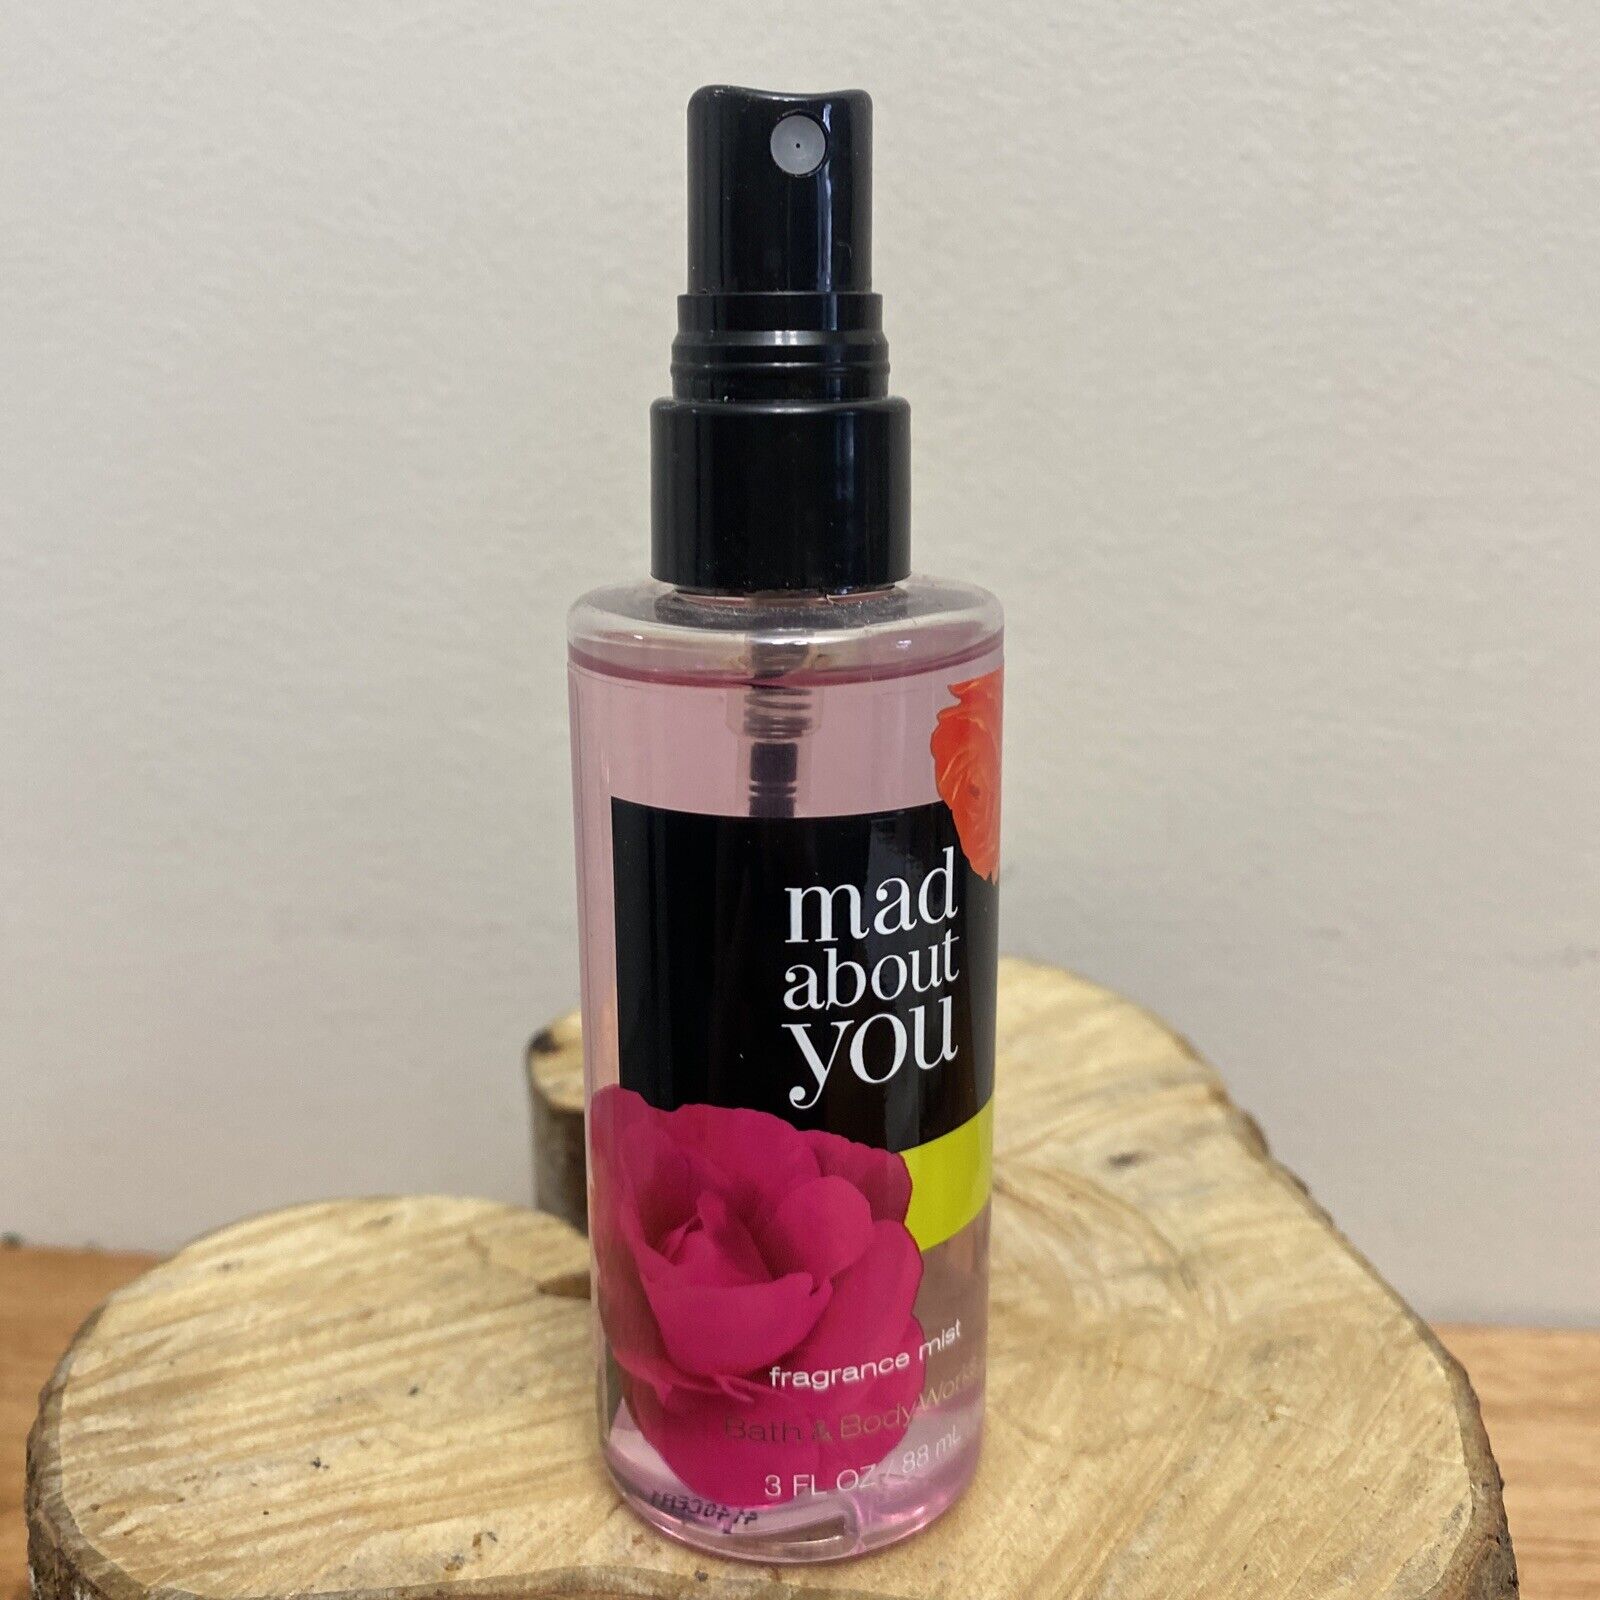 Bath and Body Works Mad About You Fragrance Mist 3 oz. Travel Size